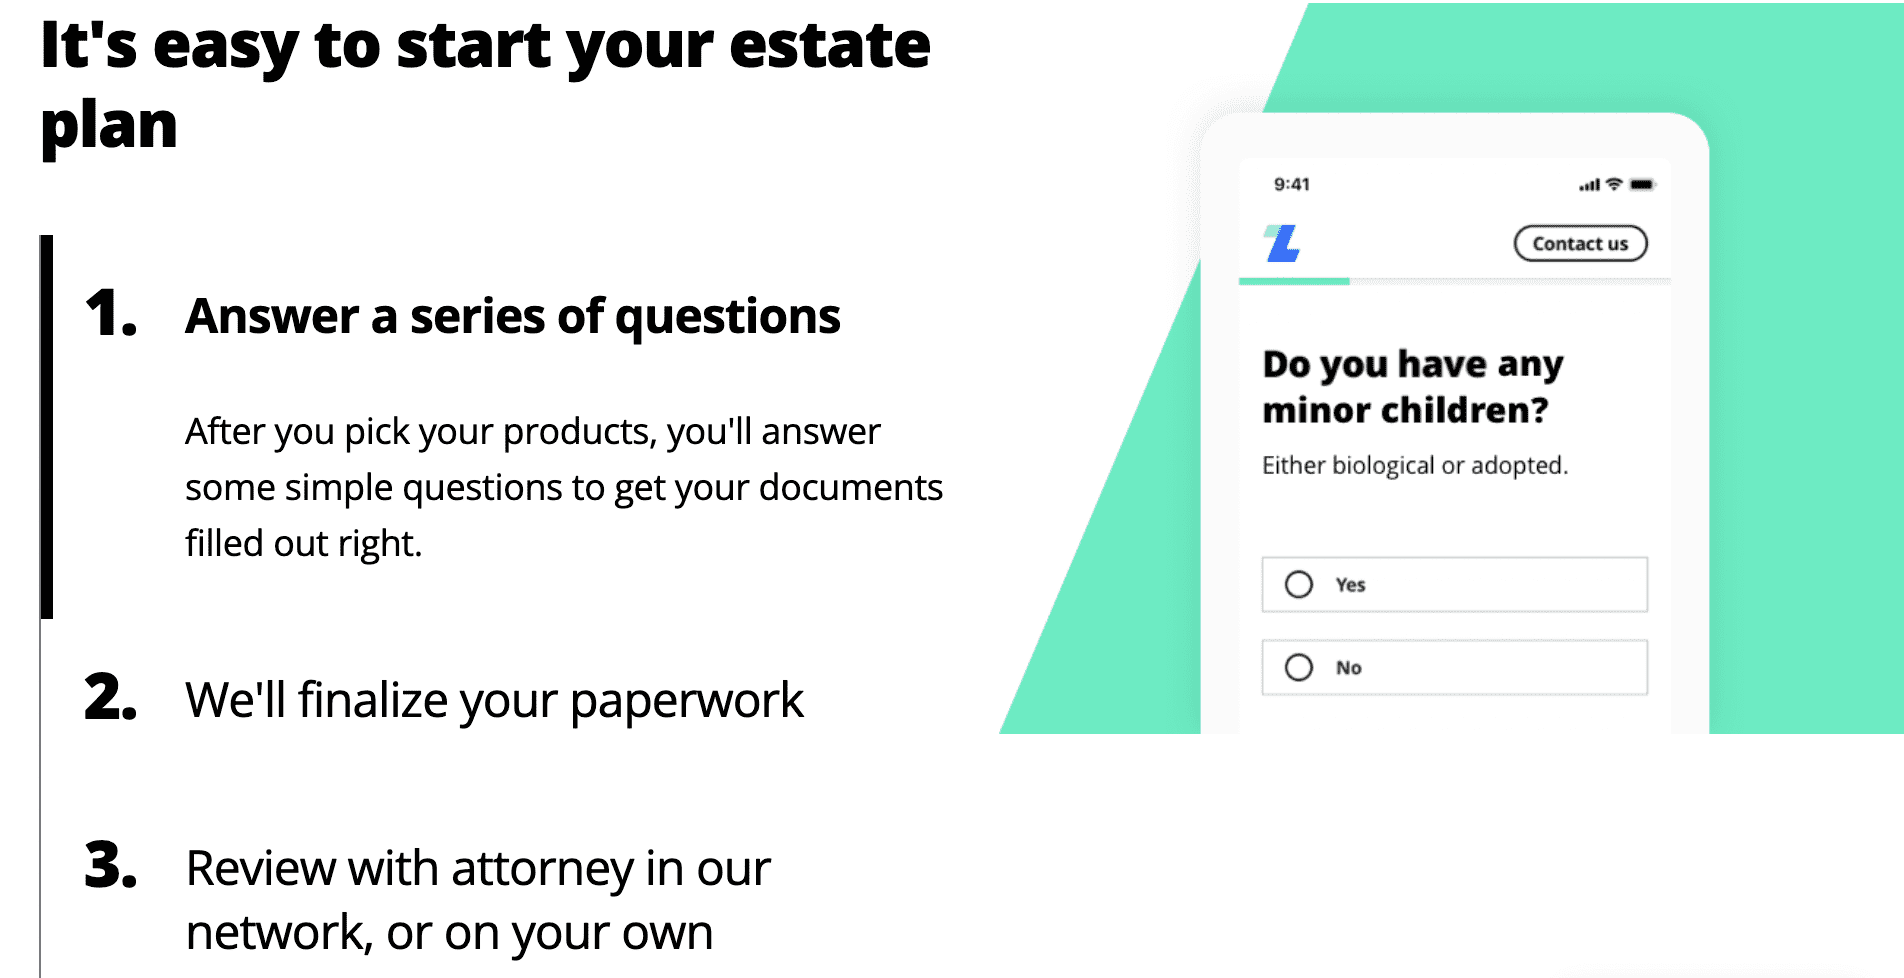 Getting started with your LegalZoom estate plan